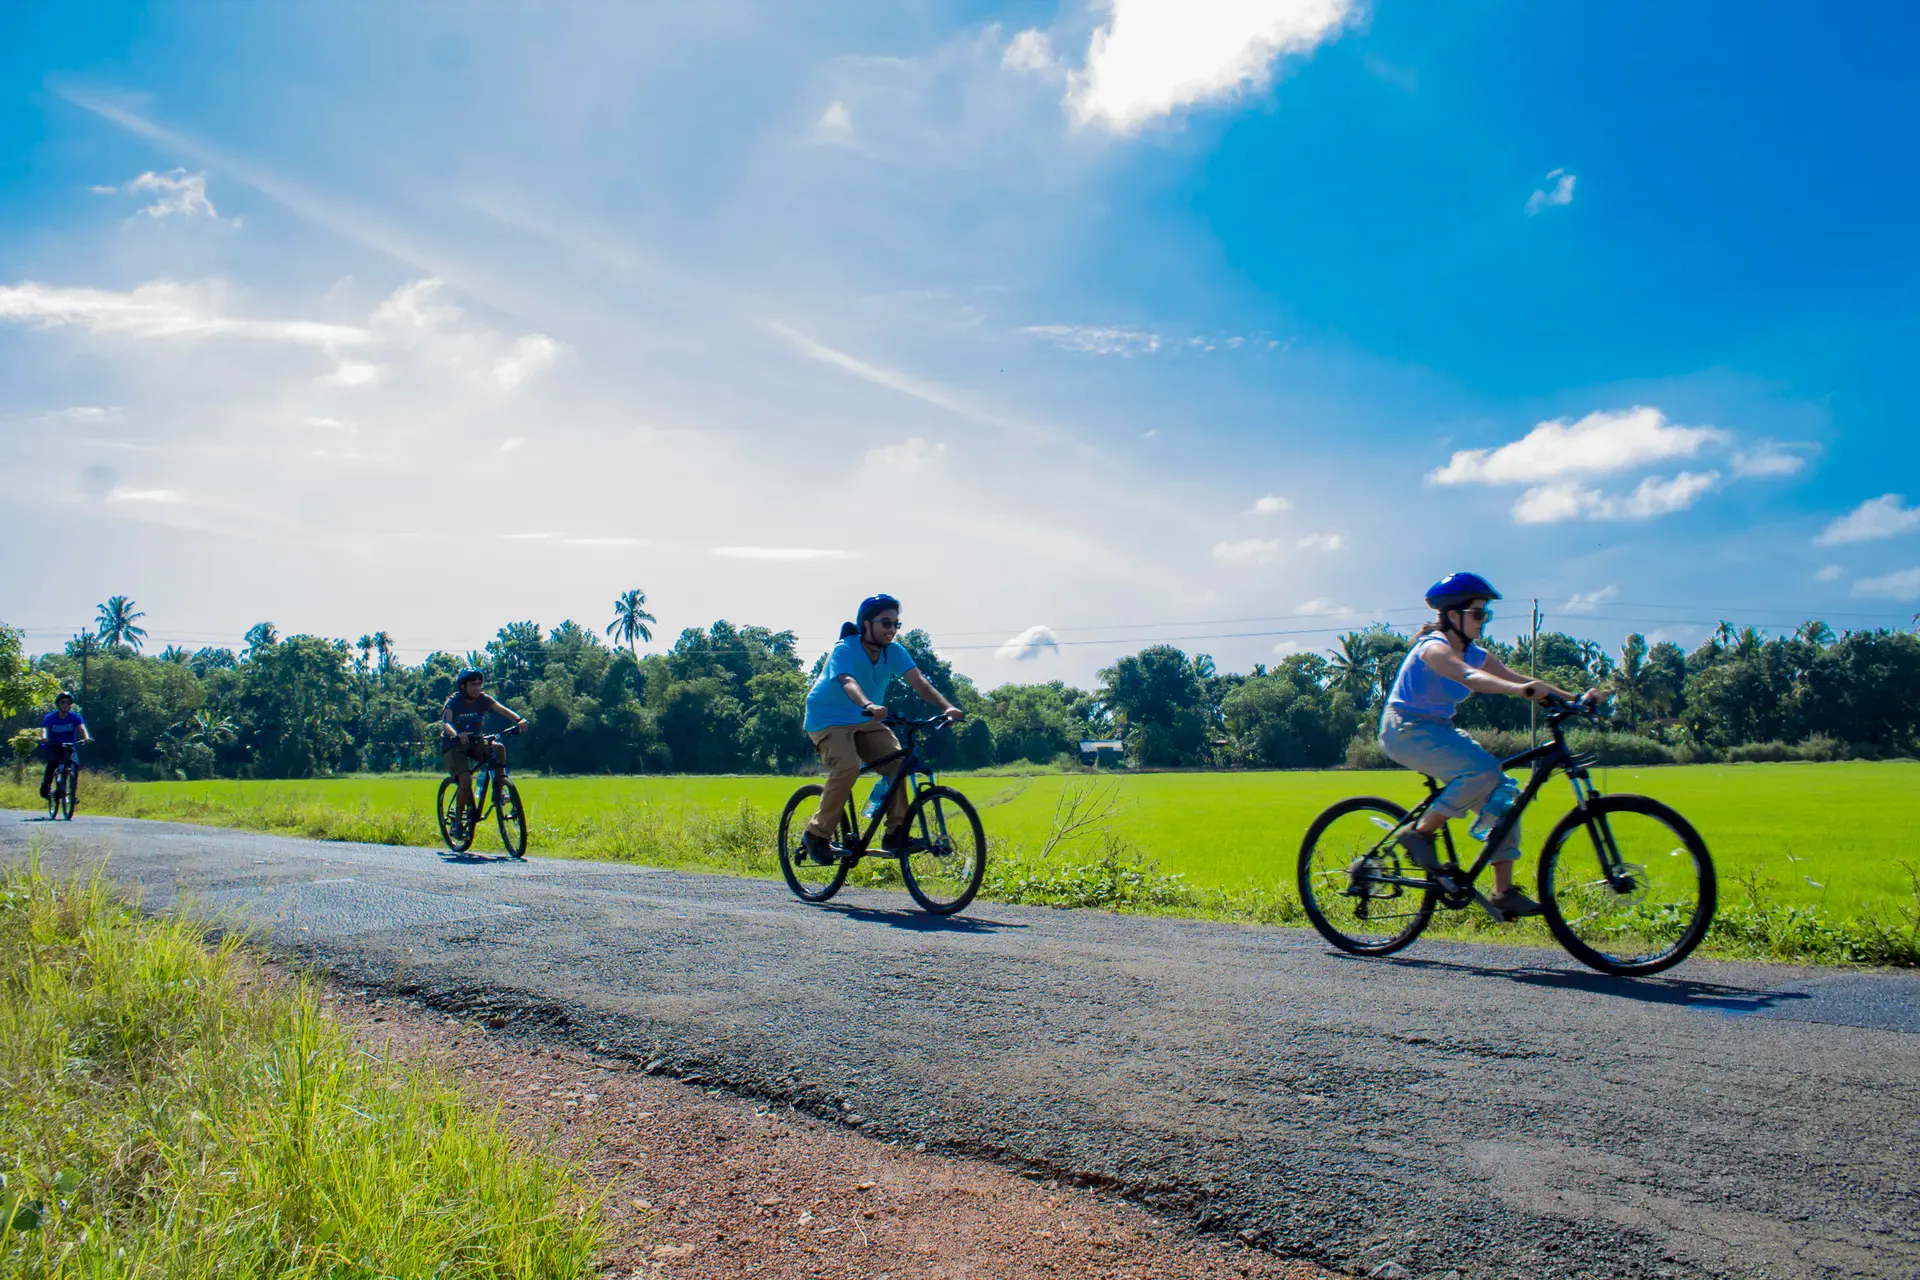 Cyclists on a tarmacked track pedalling through lush green landscape in Kerala